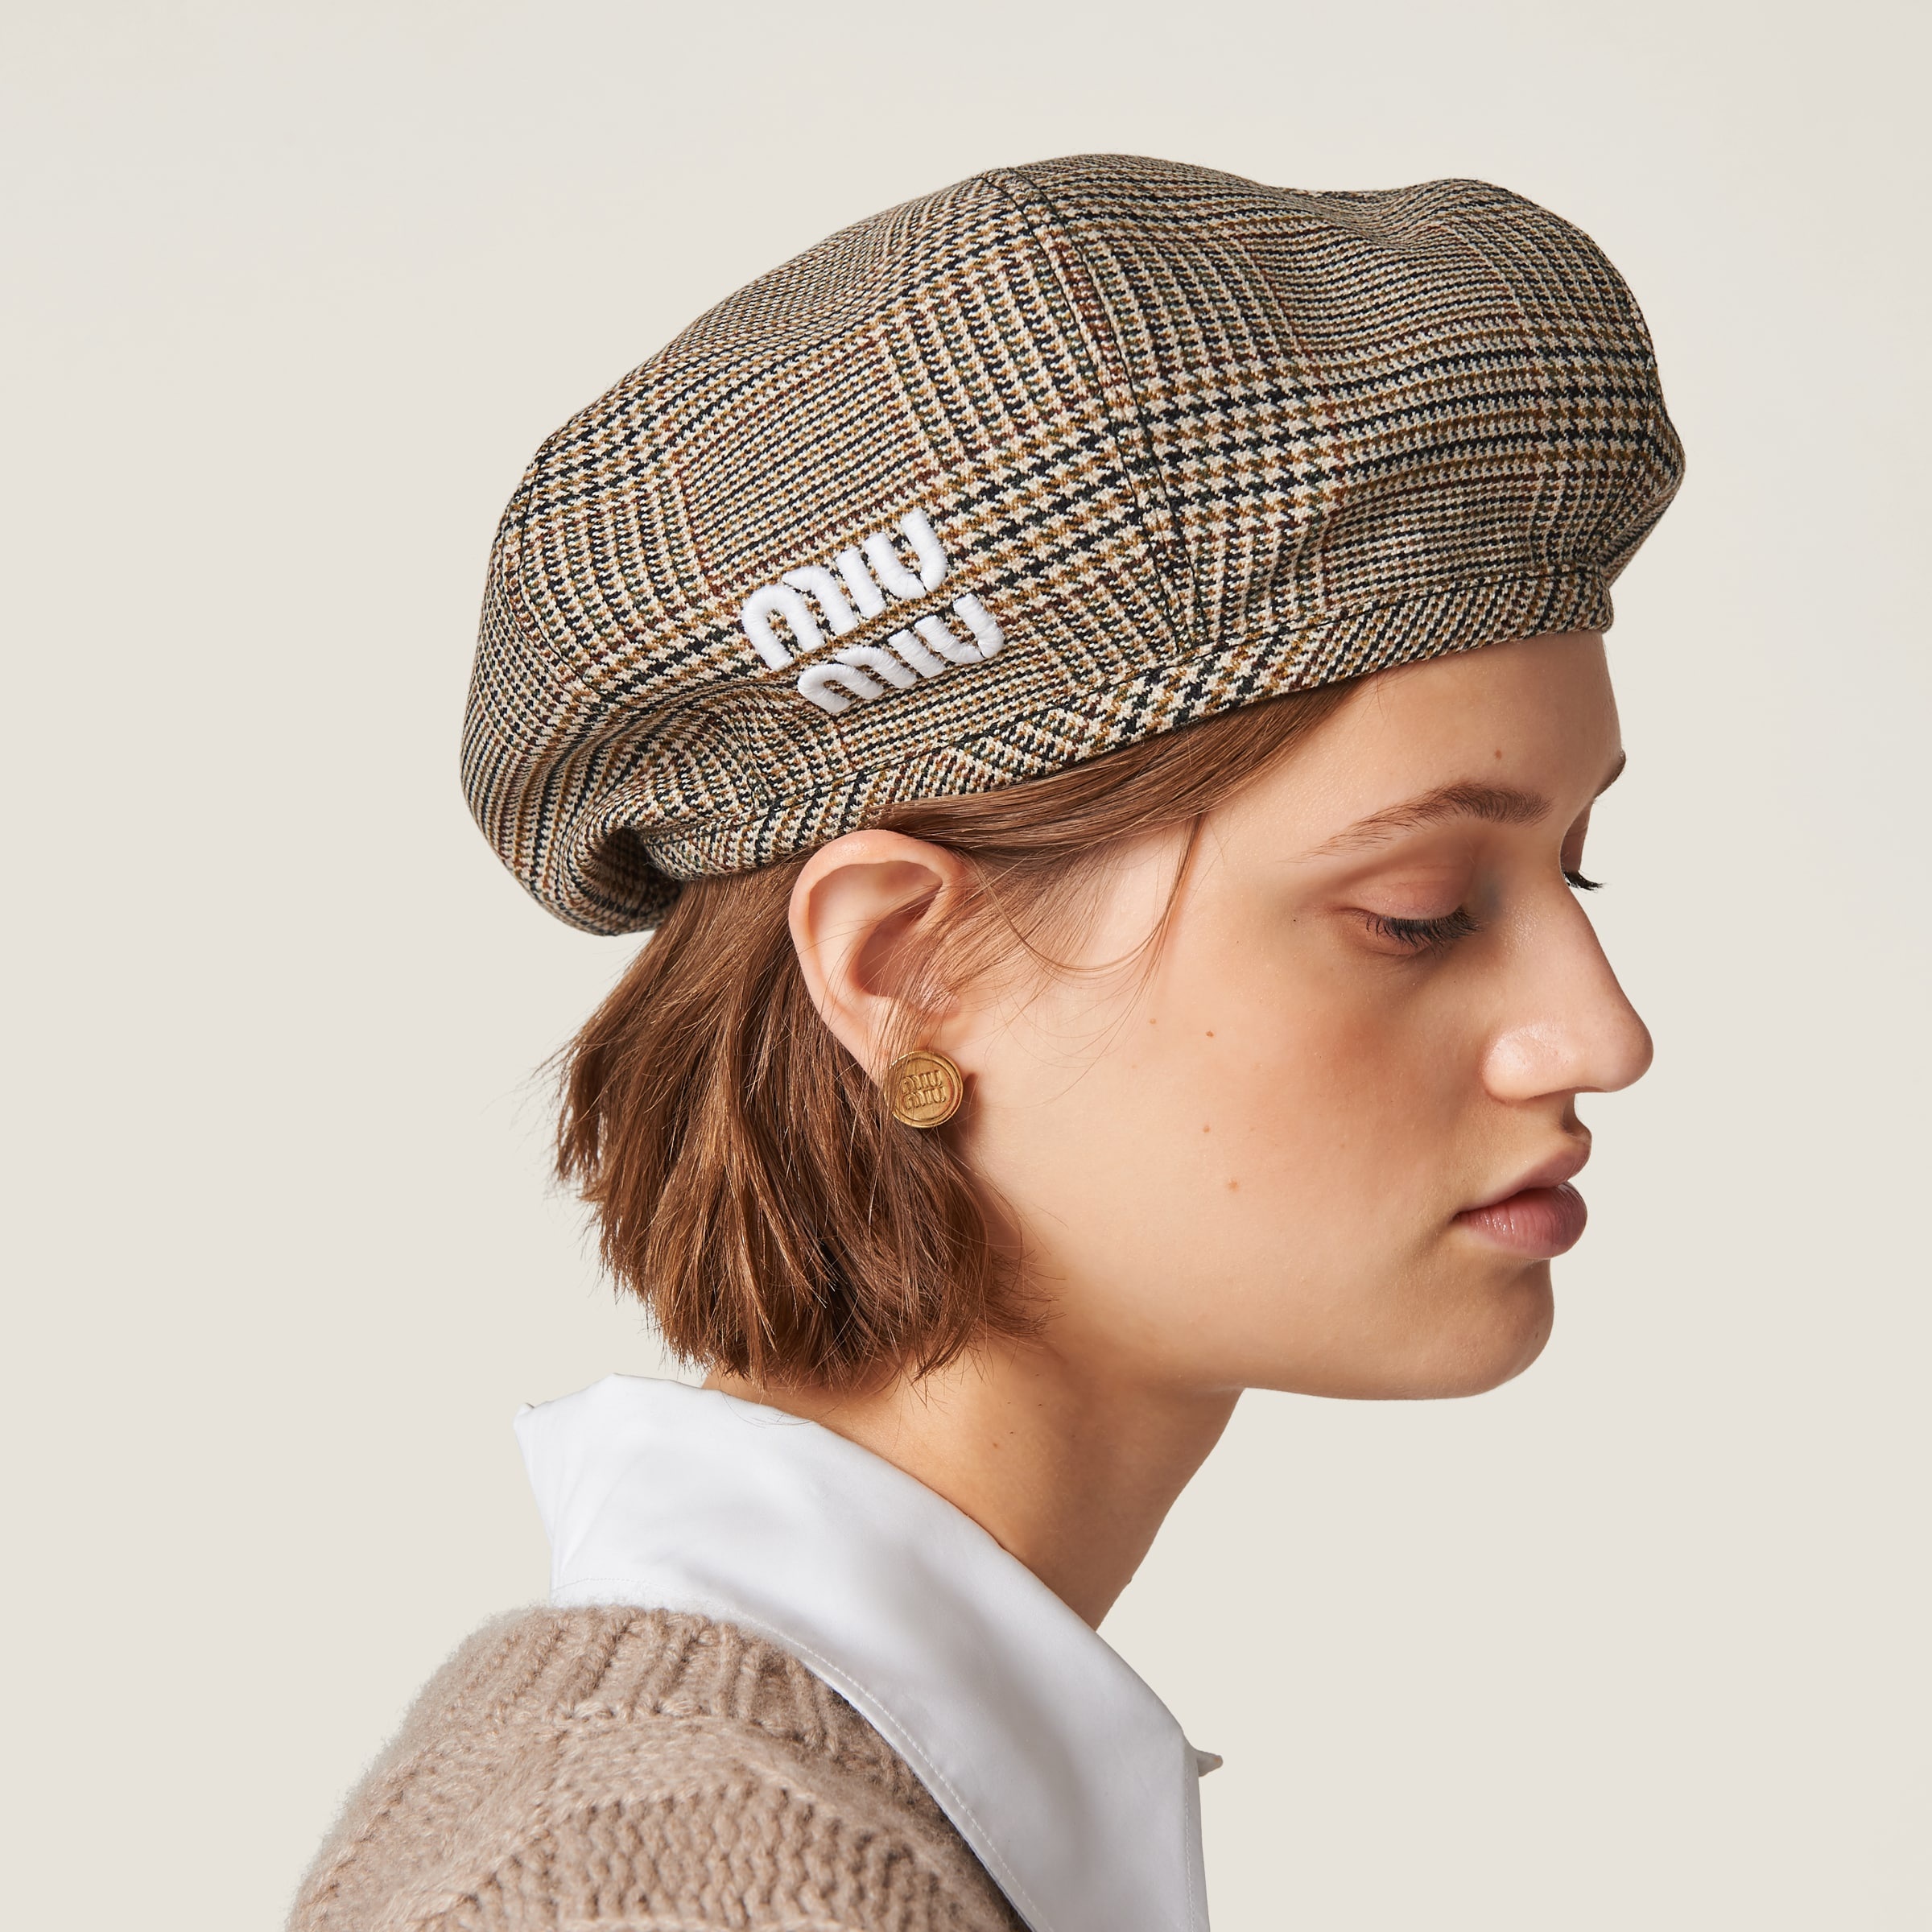 Prince of Wales checked wool hat - 2